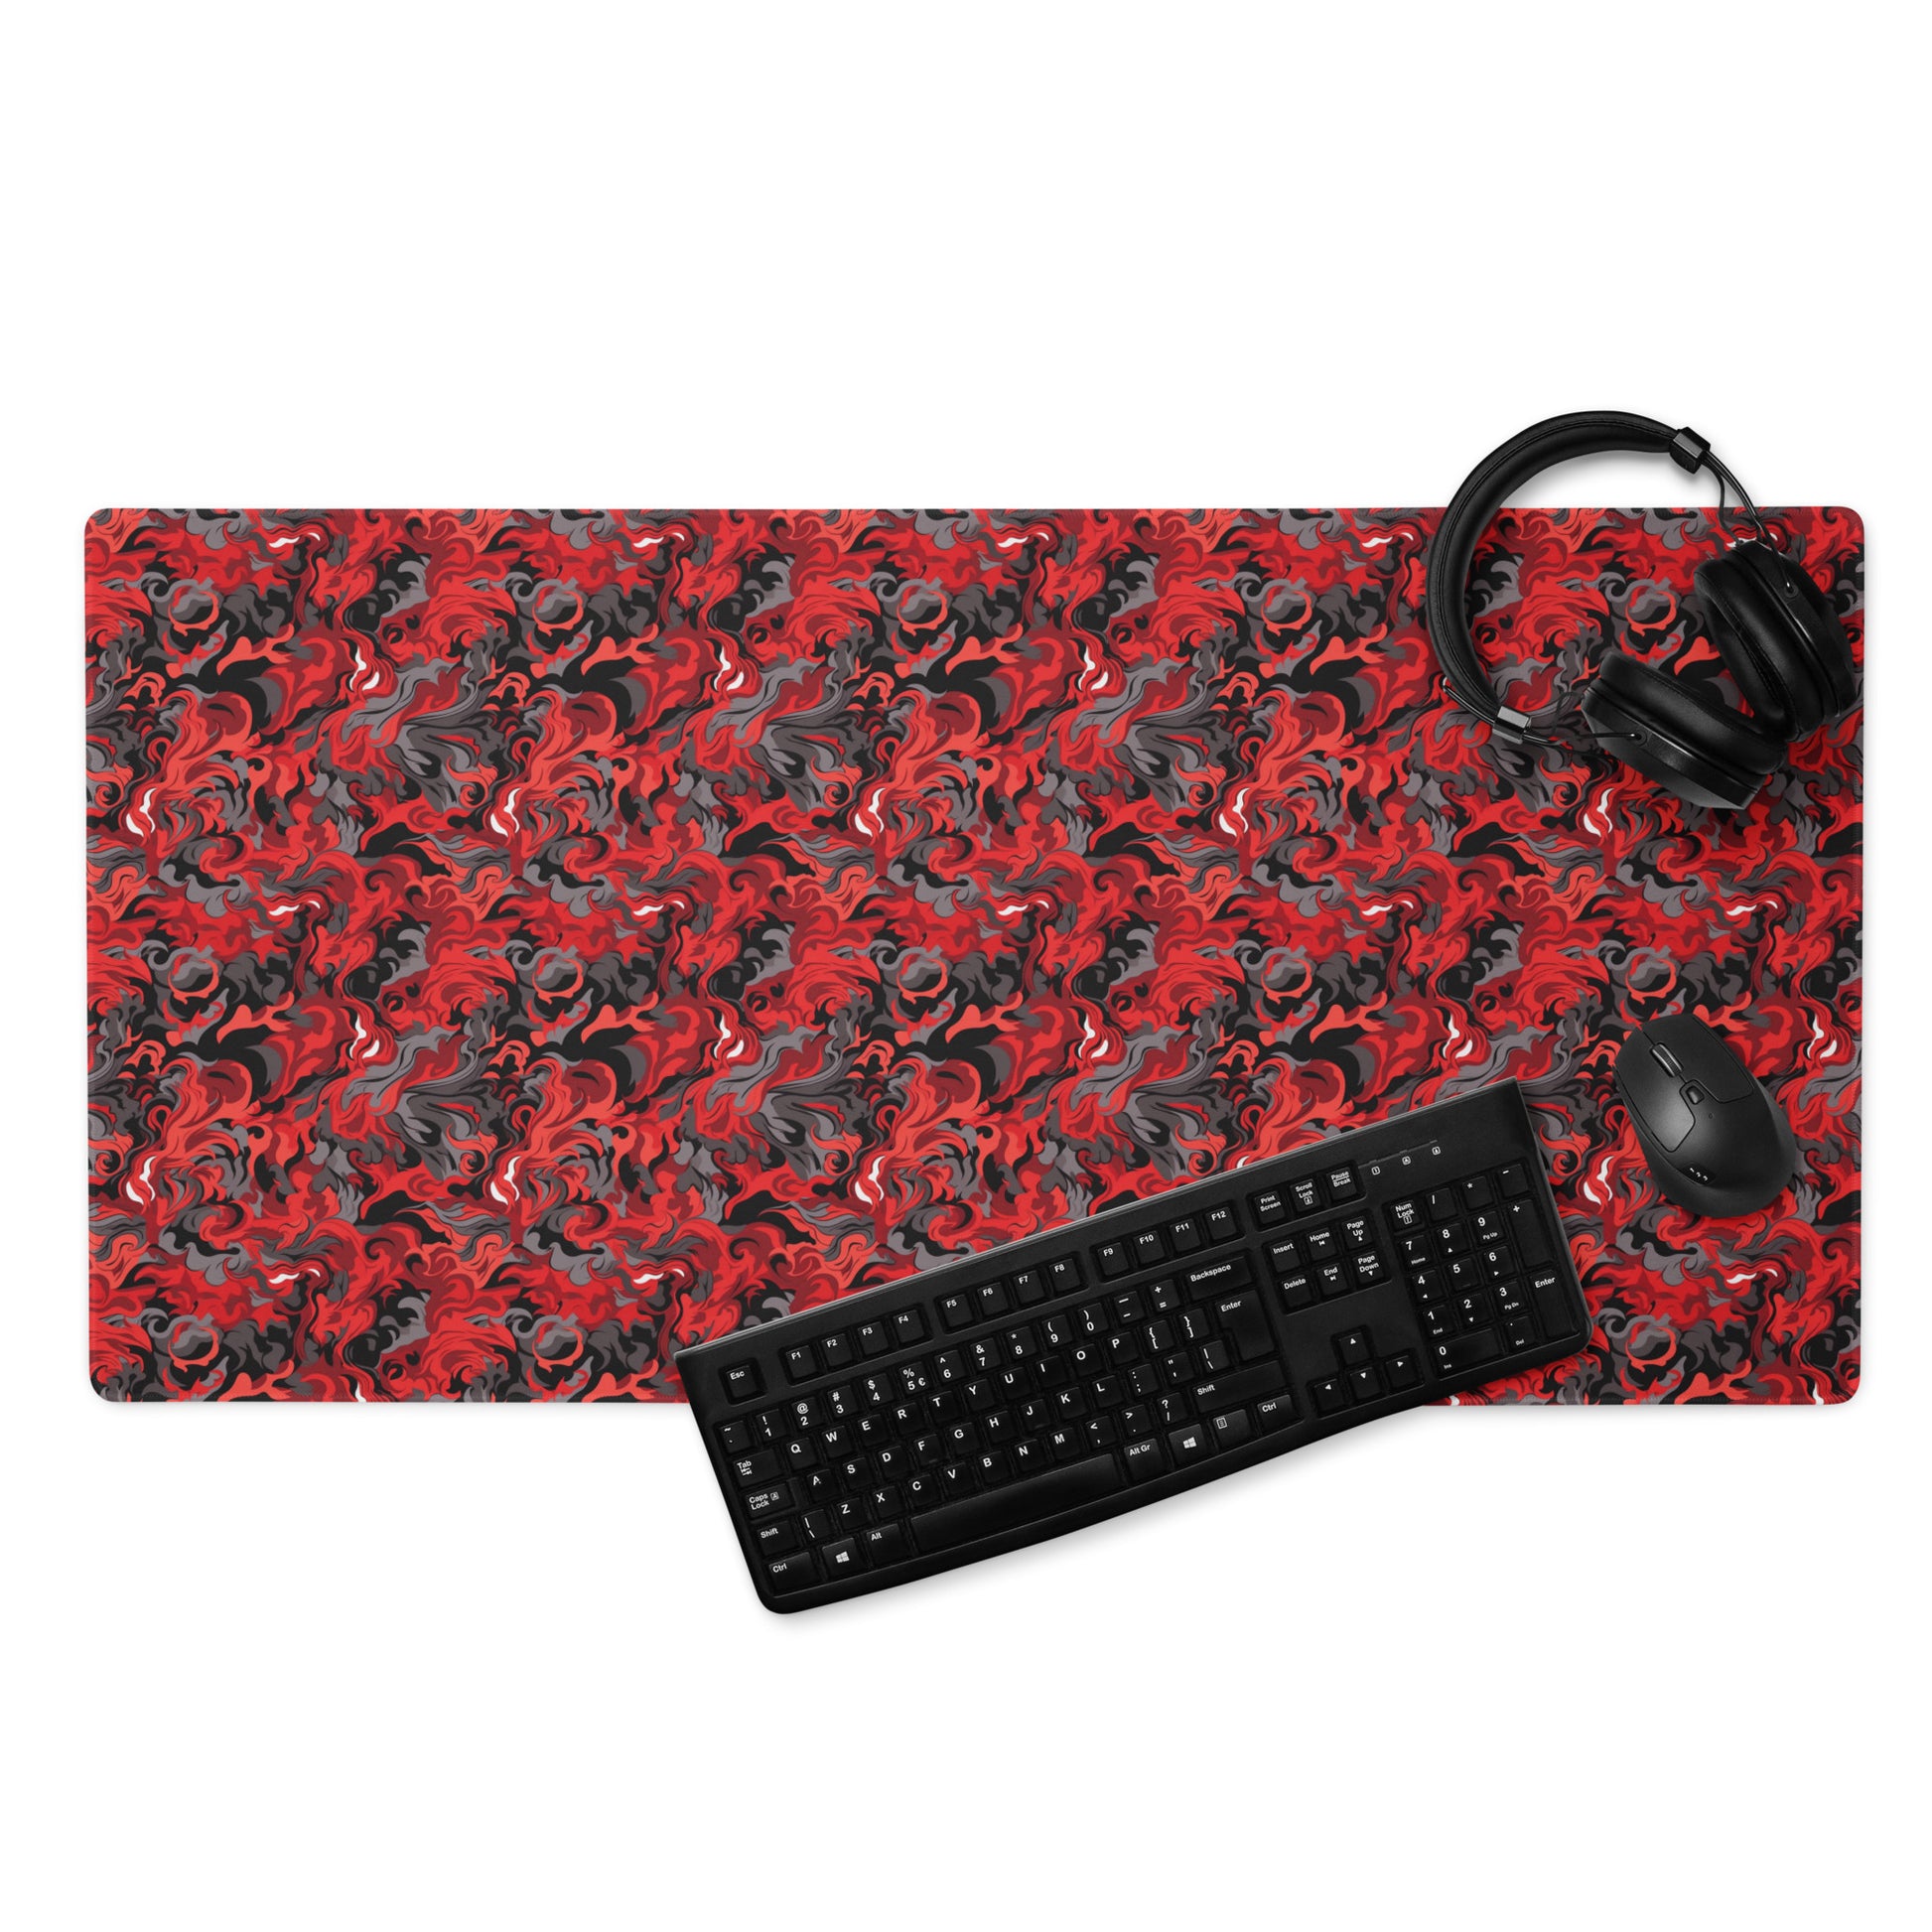 A 36" x 18" desk pad with a black and red camo pattern. With a keyboard, mouse, and headphones sitting on it.